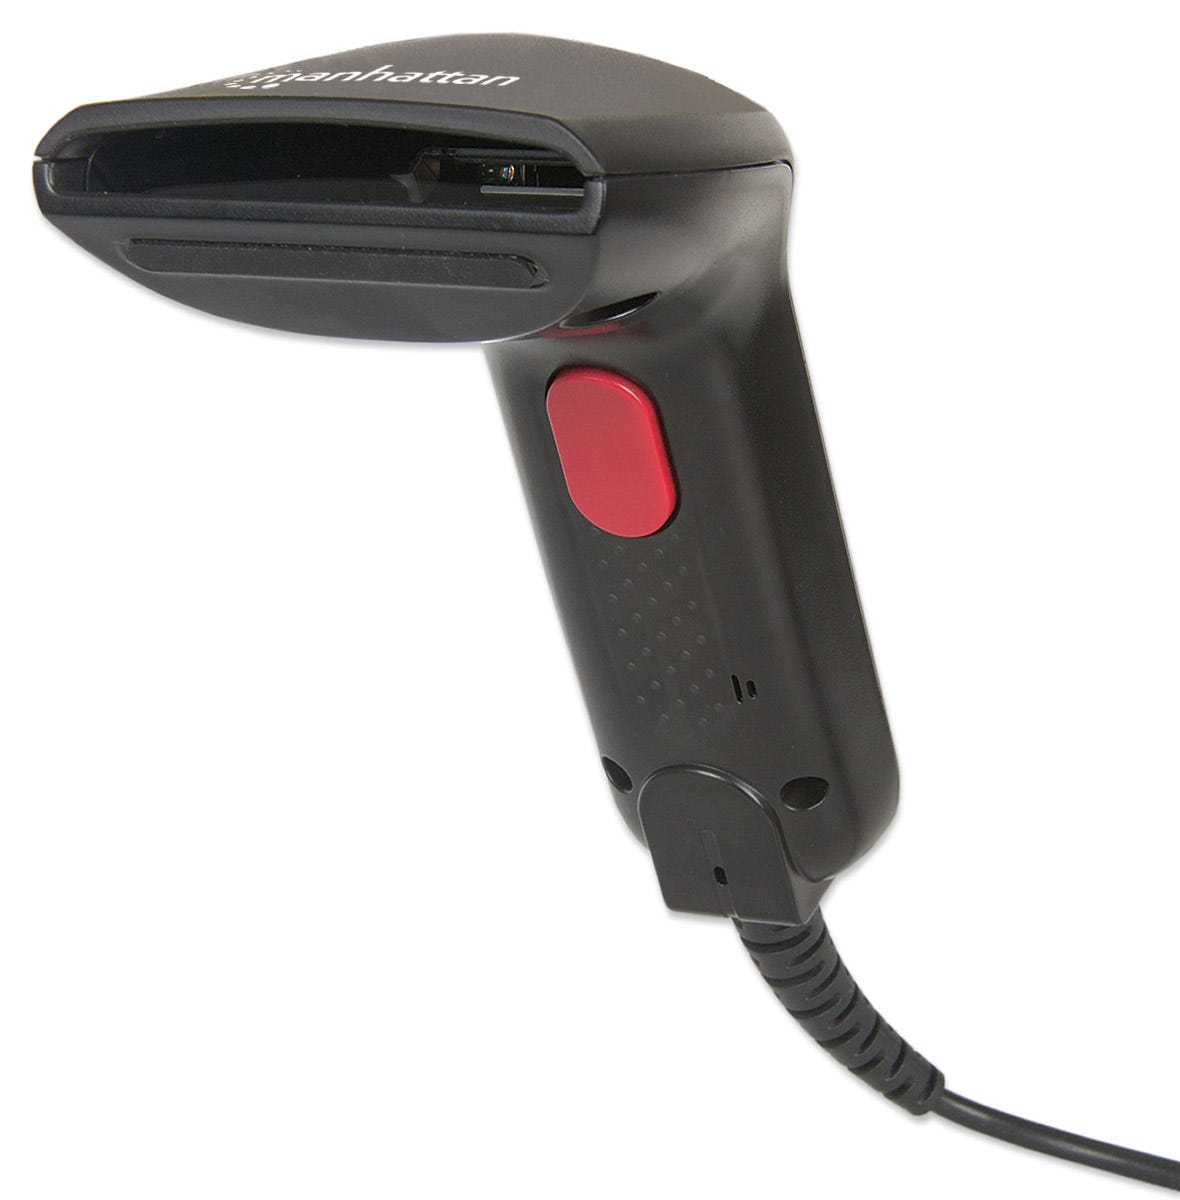 Manhattan Contact CCD Handheld Barcode Scanner, USB, 60mm Scan Width, Cable 152cm, Max Ambient Light 5,000 lux (sunlight)